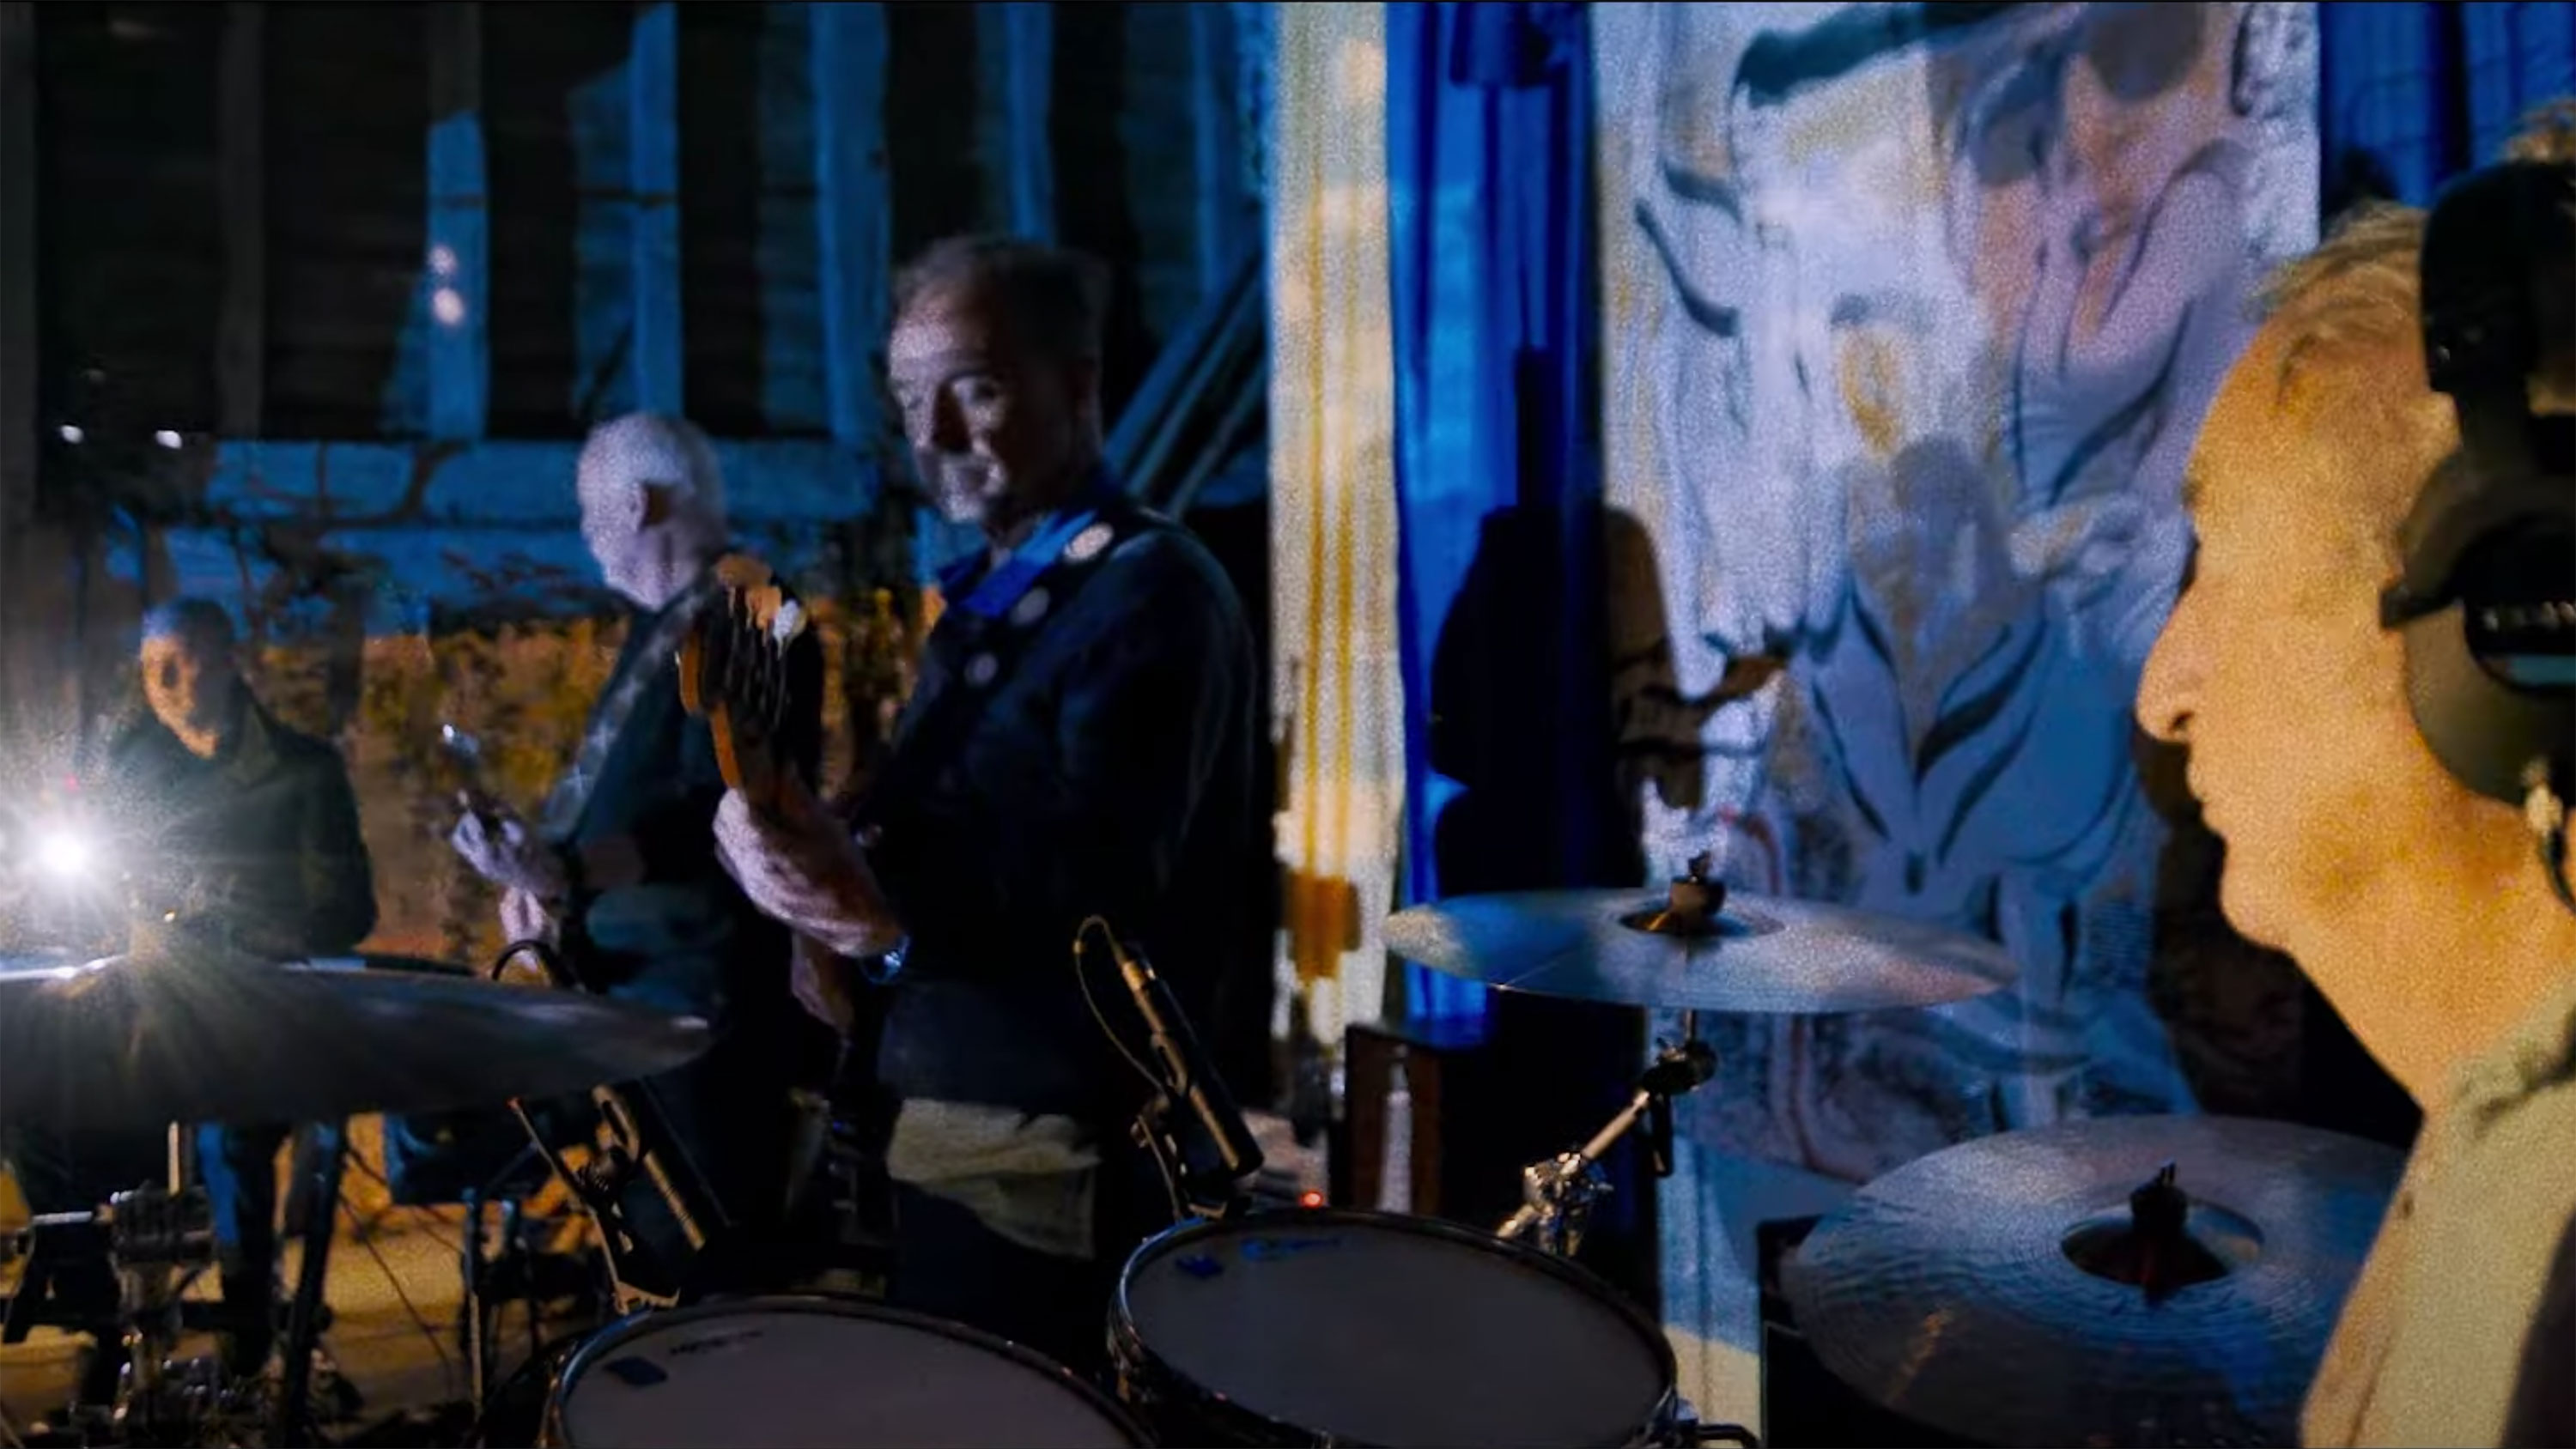 Pink Floyd perform "Hey Hey Rise Up" in this screengrab taken from the music video for the song.